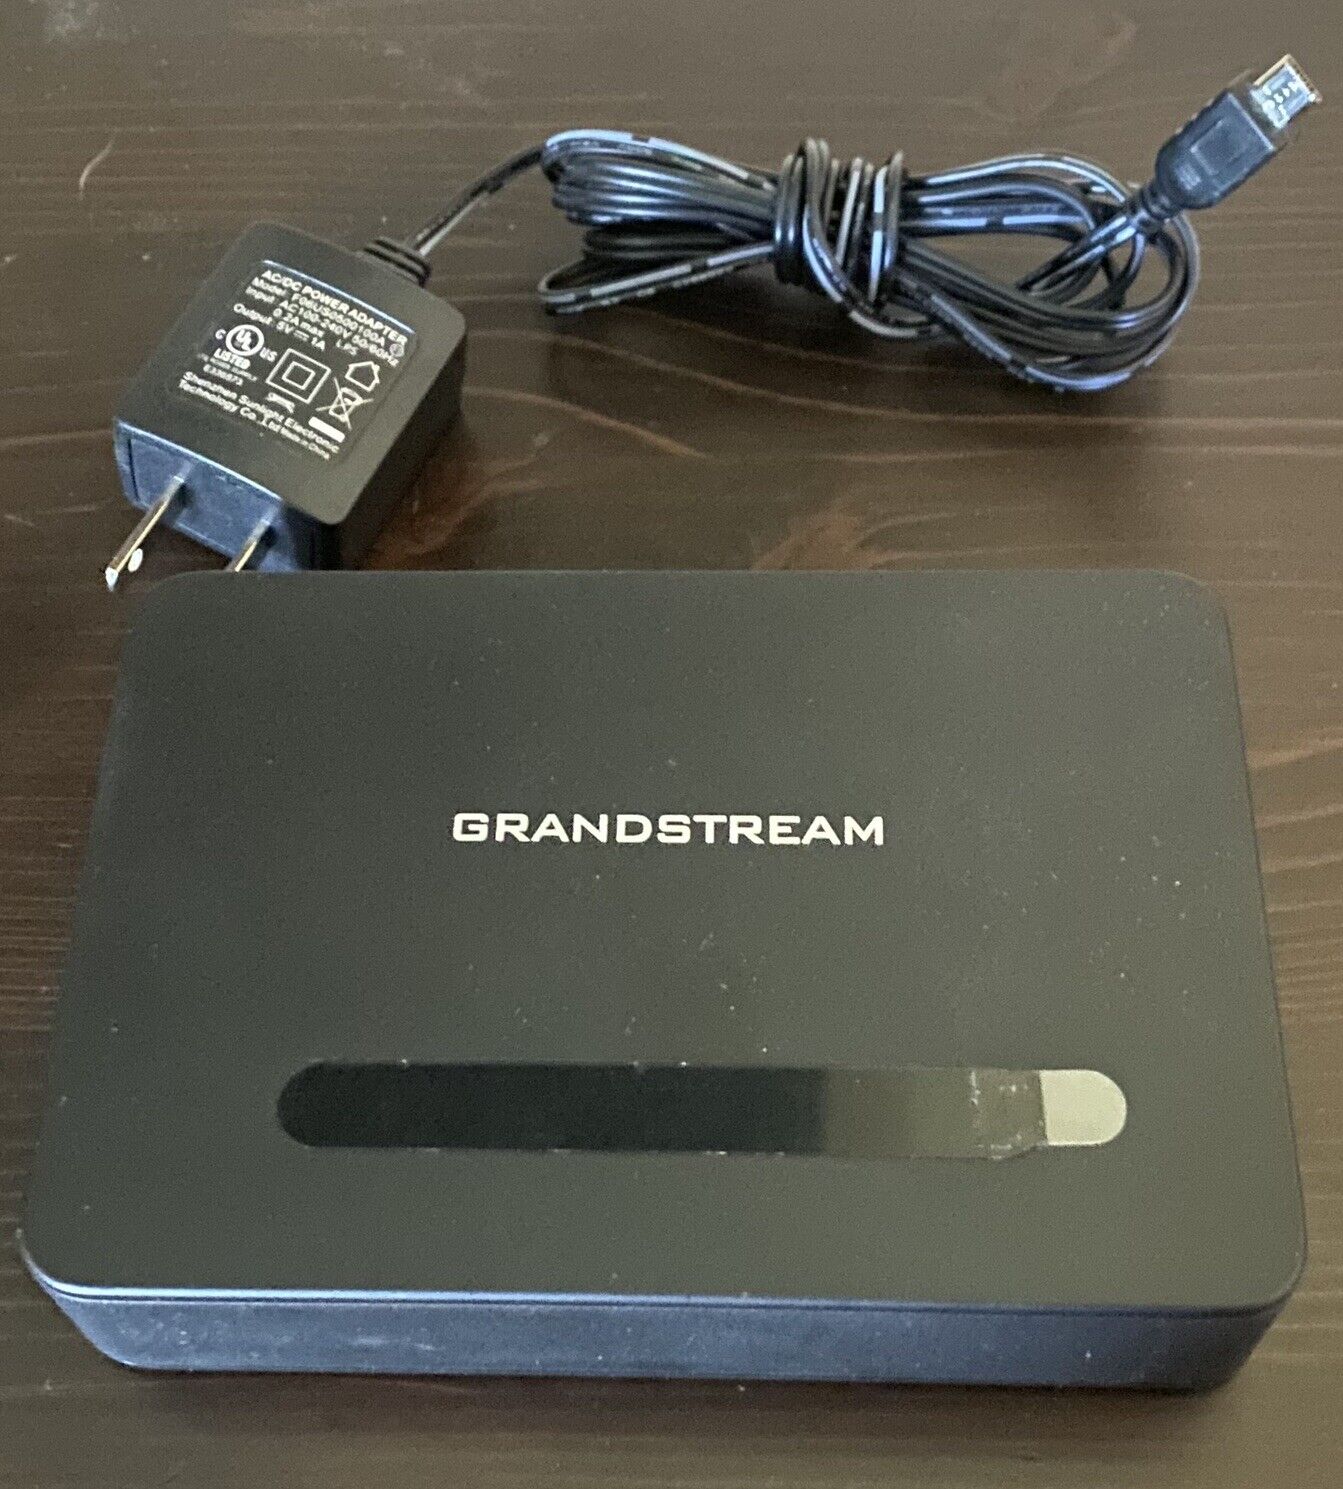 Grandstream DP750 DECT VoIP Base Station Black 10 SIP Accounts 3-way Conference